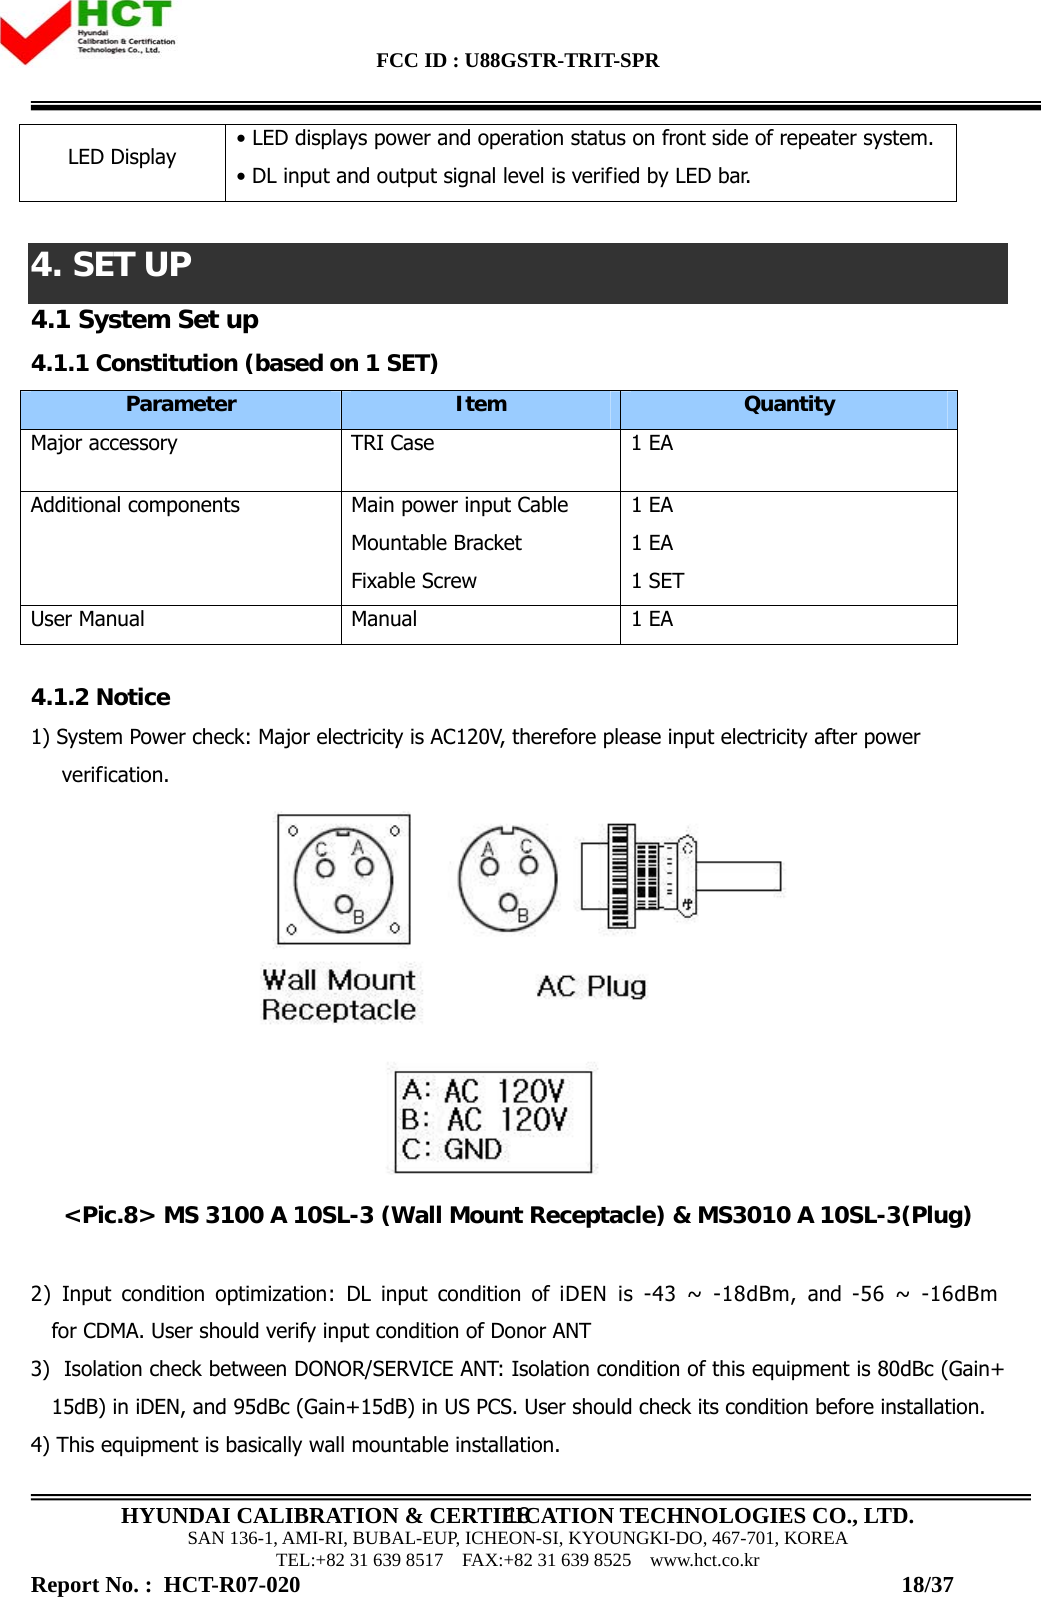 FCC ID : U88GSTR-TRIT-SPR                                                                                          HYUNDAI CALIBRATION &amp; CERTIFICATION TECHNOLOGIES CO., LTD. SAN 136-1, AMI-RI, BUBAL-EUP, ICHEON-SI, KYOUNGKI-DO, 467-701, KOREA TEL:+82 31 639 8517    FAX:+82 31 639 8525    www.hct.co.kr 18LED Display  • LED displays power and operation status on front side of repeater system. • DL input and output signal level is verified by LED bar.   4. SET UP 4.1 System Set up 4.1.1 Constitution (based on 1 SET) Parameter  Item  Quantity Major accessory   TRI Case  1 EA Additional components  Main power input Cable Mountable Bracket Fixable Screw 1 EA 1 EA 1 SET User Manual  Manual  1 EA  4.1.2 Notice 1) System Power check: Major electricity is AC120V, therefore please input electricity after power verification.   &lt;Pic.8&gt; MS 3100 A 10SL-3 (Wall Mount Receptacle) &amp; MS3010 A 10SL-3(Plug)  2) Input condition optimization: DL input condition of iDEN is -43 ~ -18dBm, and -56 ~ -16dBm for CDMA. User should verify input condition of Donor ANT 3)  Isolation check between DONOR/SERVICE ANT: Isolation condition of this equipment is 80dBc (Gain+15dB) in iDEN, and 95dBc (Gain+15dB) in US PCS. User should check its condition before installation. 4) This equipment is basically wall mountable installation.  Report No. :  HCT-R07-020                                                                                                         18/37 